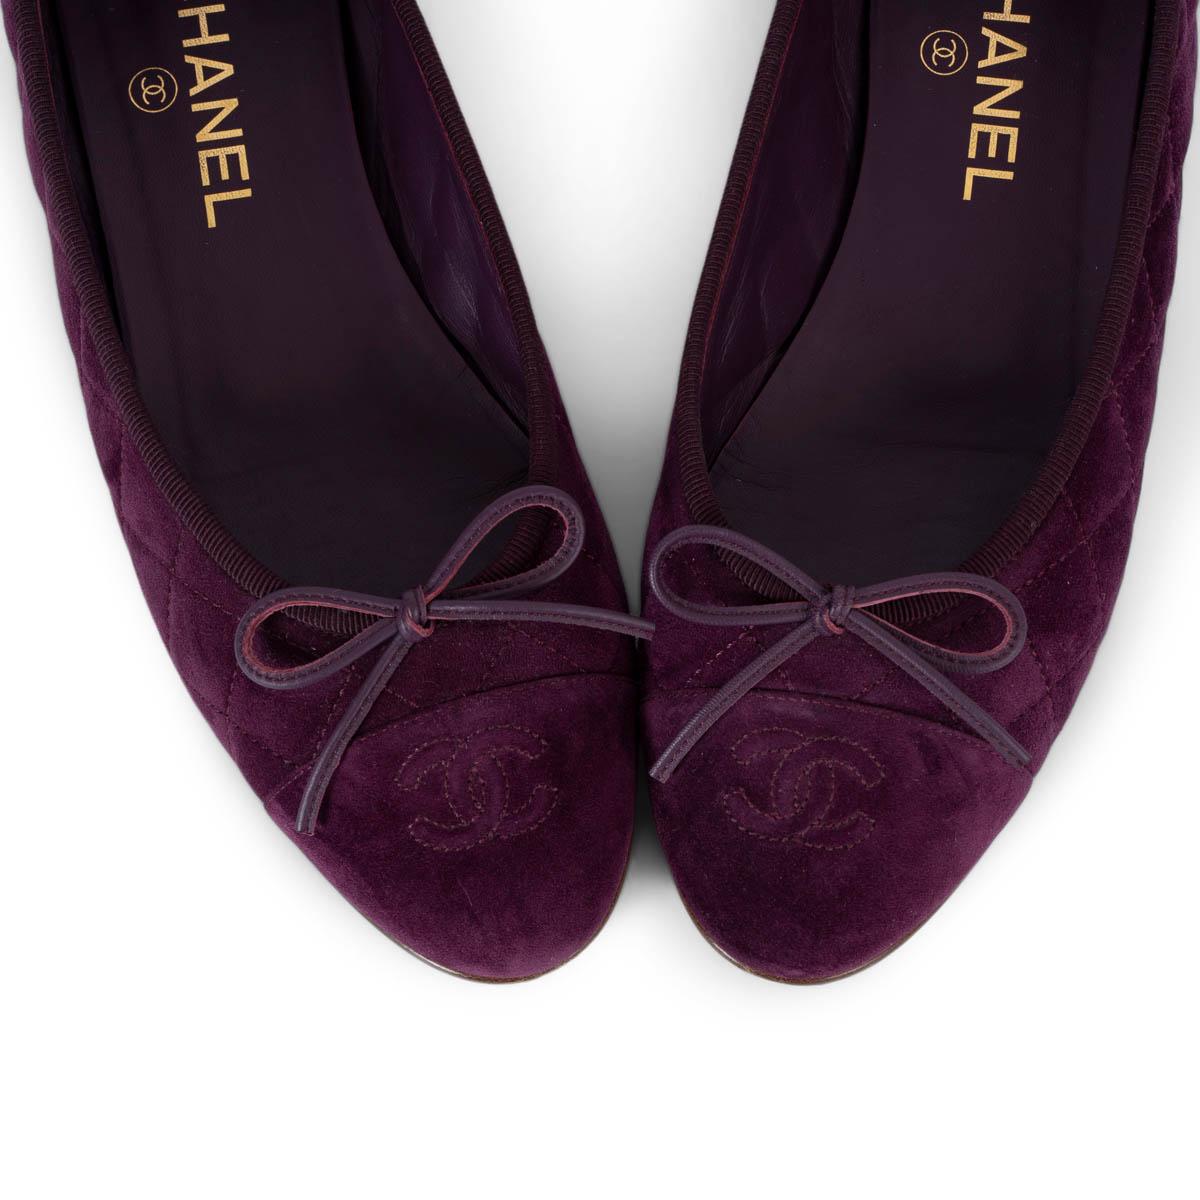 CHANEL purple suede QUILTED CLASSIC BALLET Flats Shoes 38.5 fit 38 For Sale 3